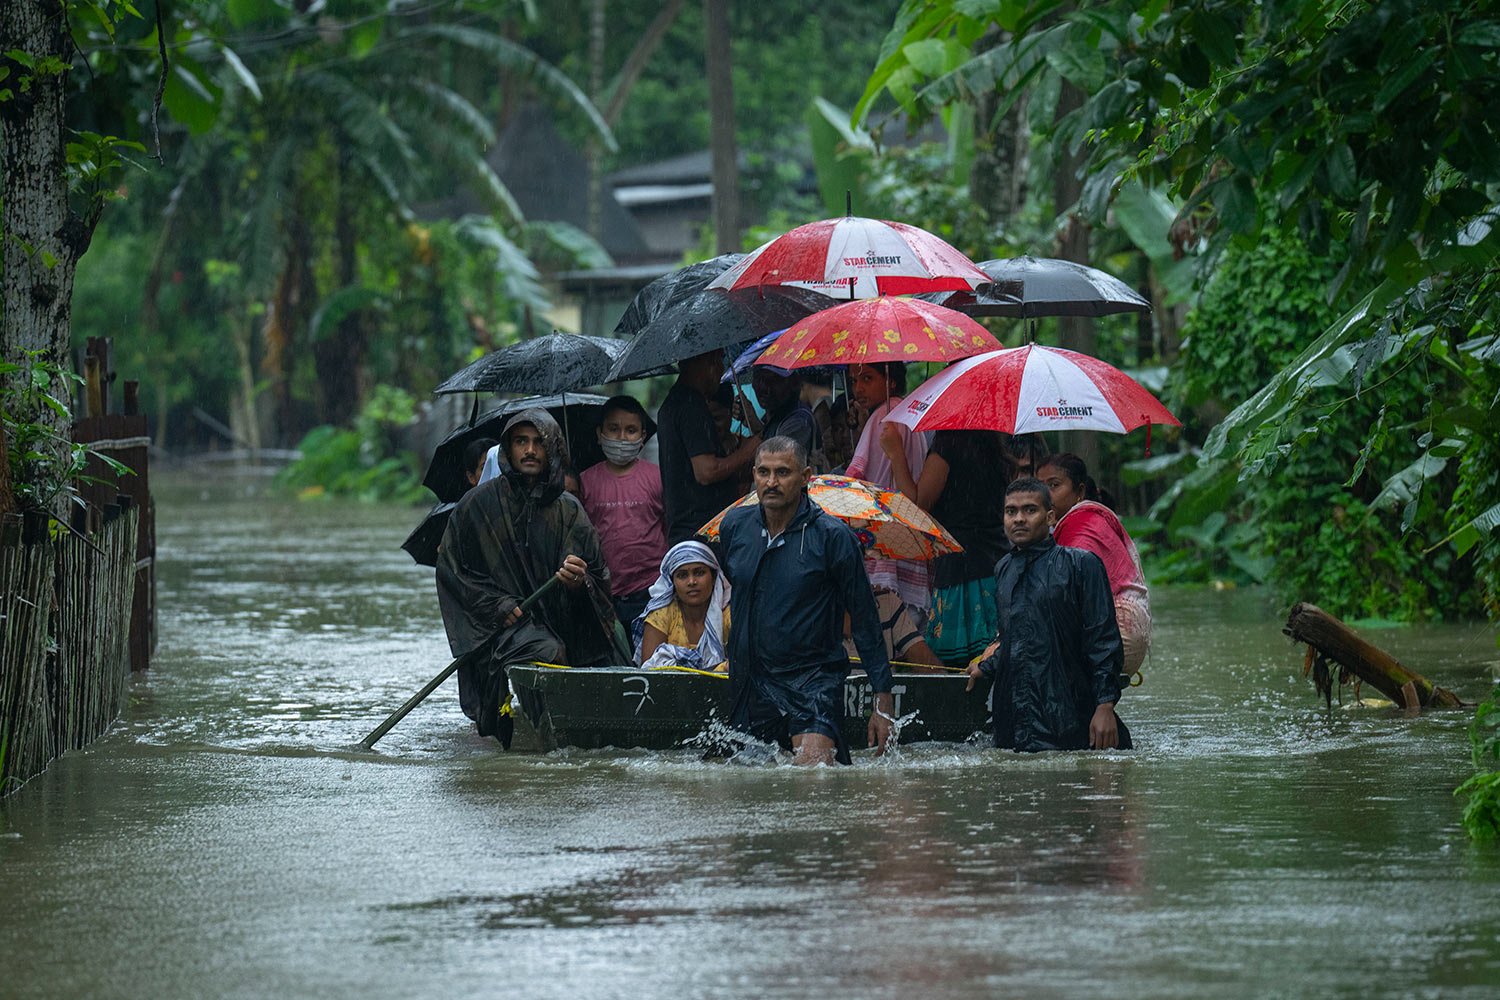  Indian army personnel rescue flood-affected villagers on a boat in Jalimura village, west of Gauhati, India, Saturday, June 18, 2022. (AP Photo/Anupam Nath) 